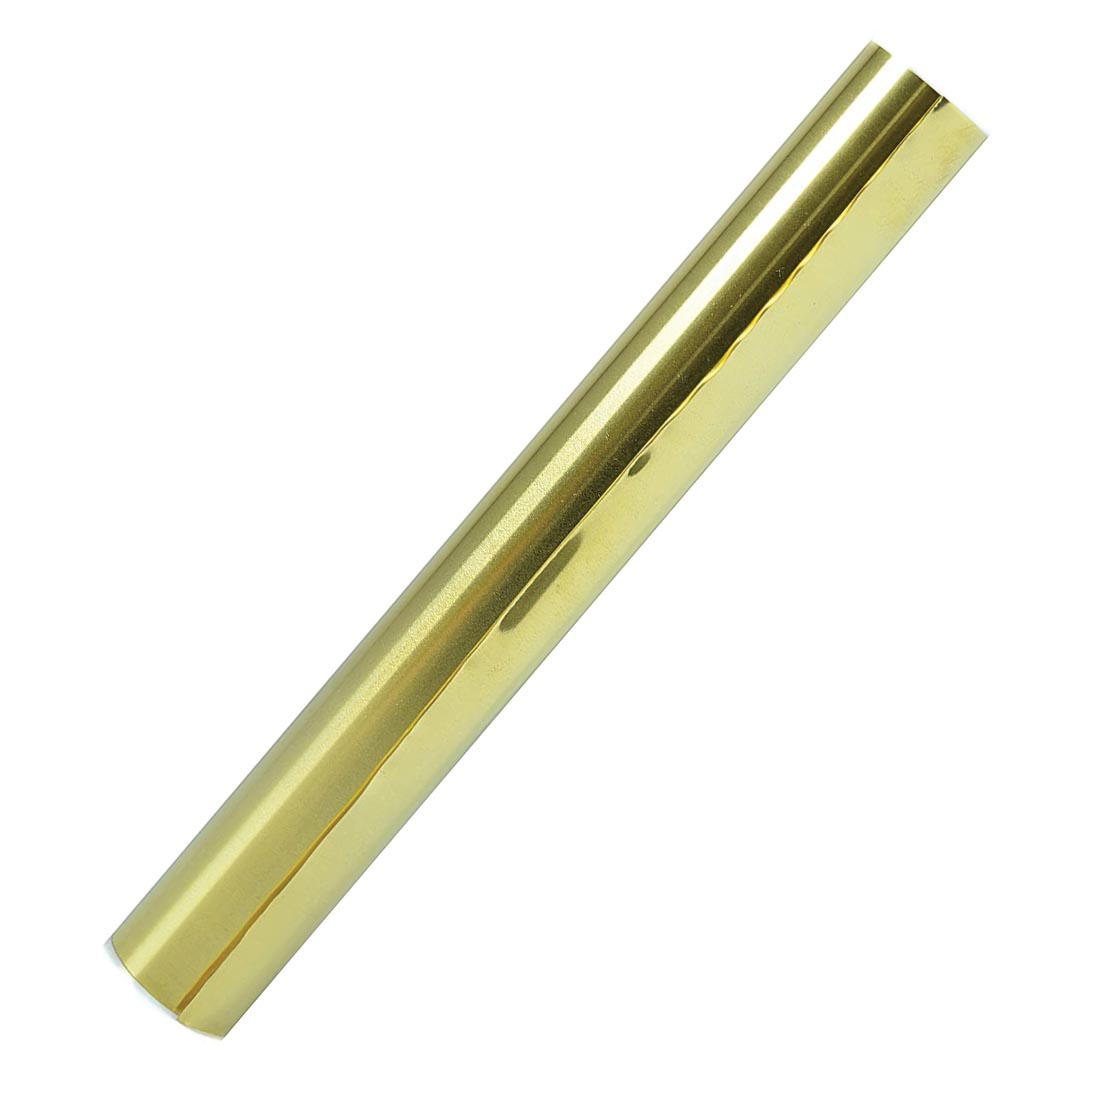 Roll of Brass Metal Tooling Foil by St. Louis Crafts